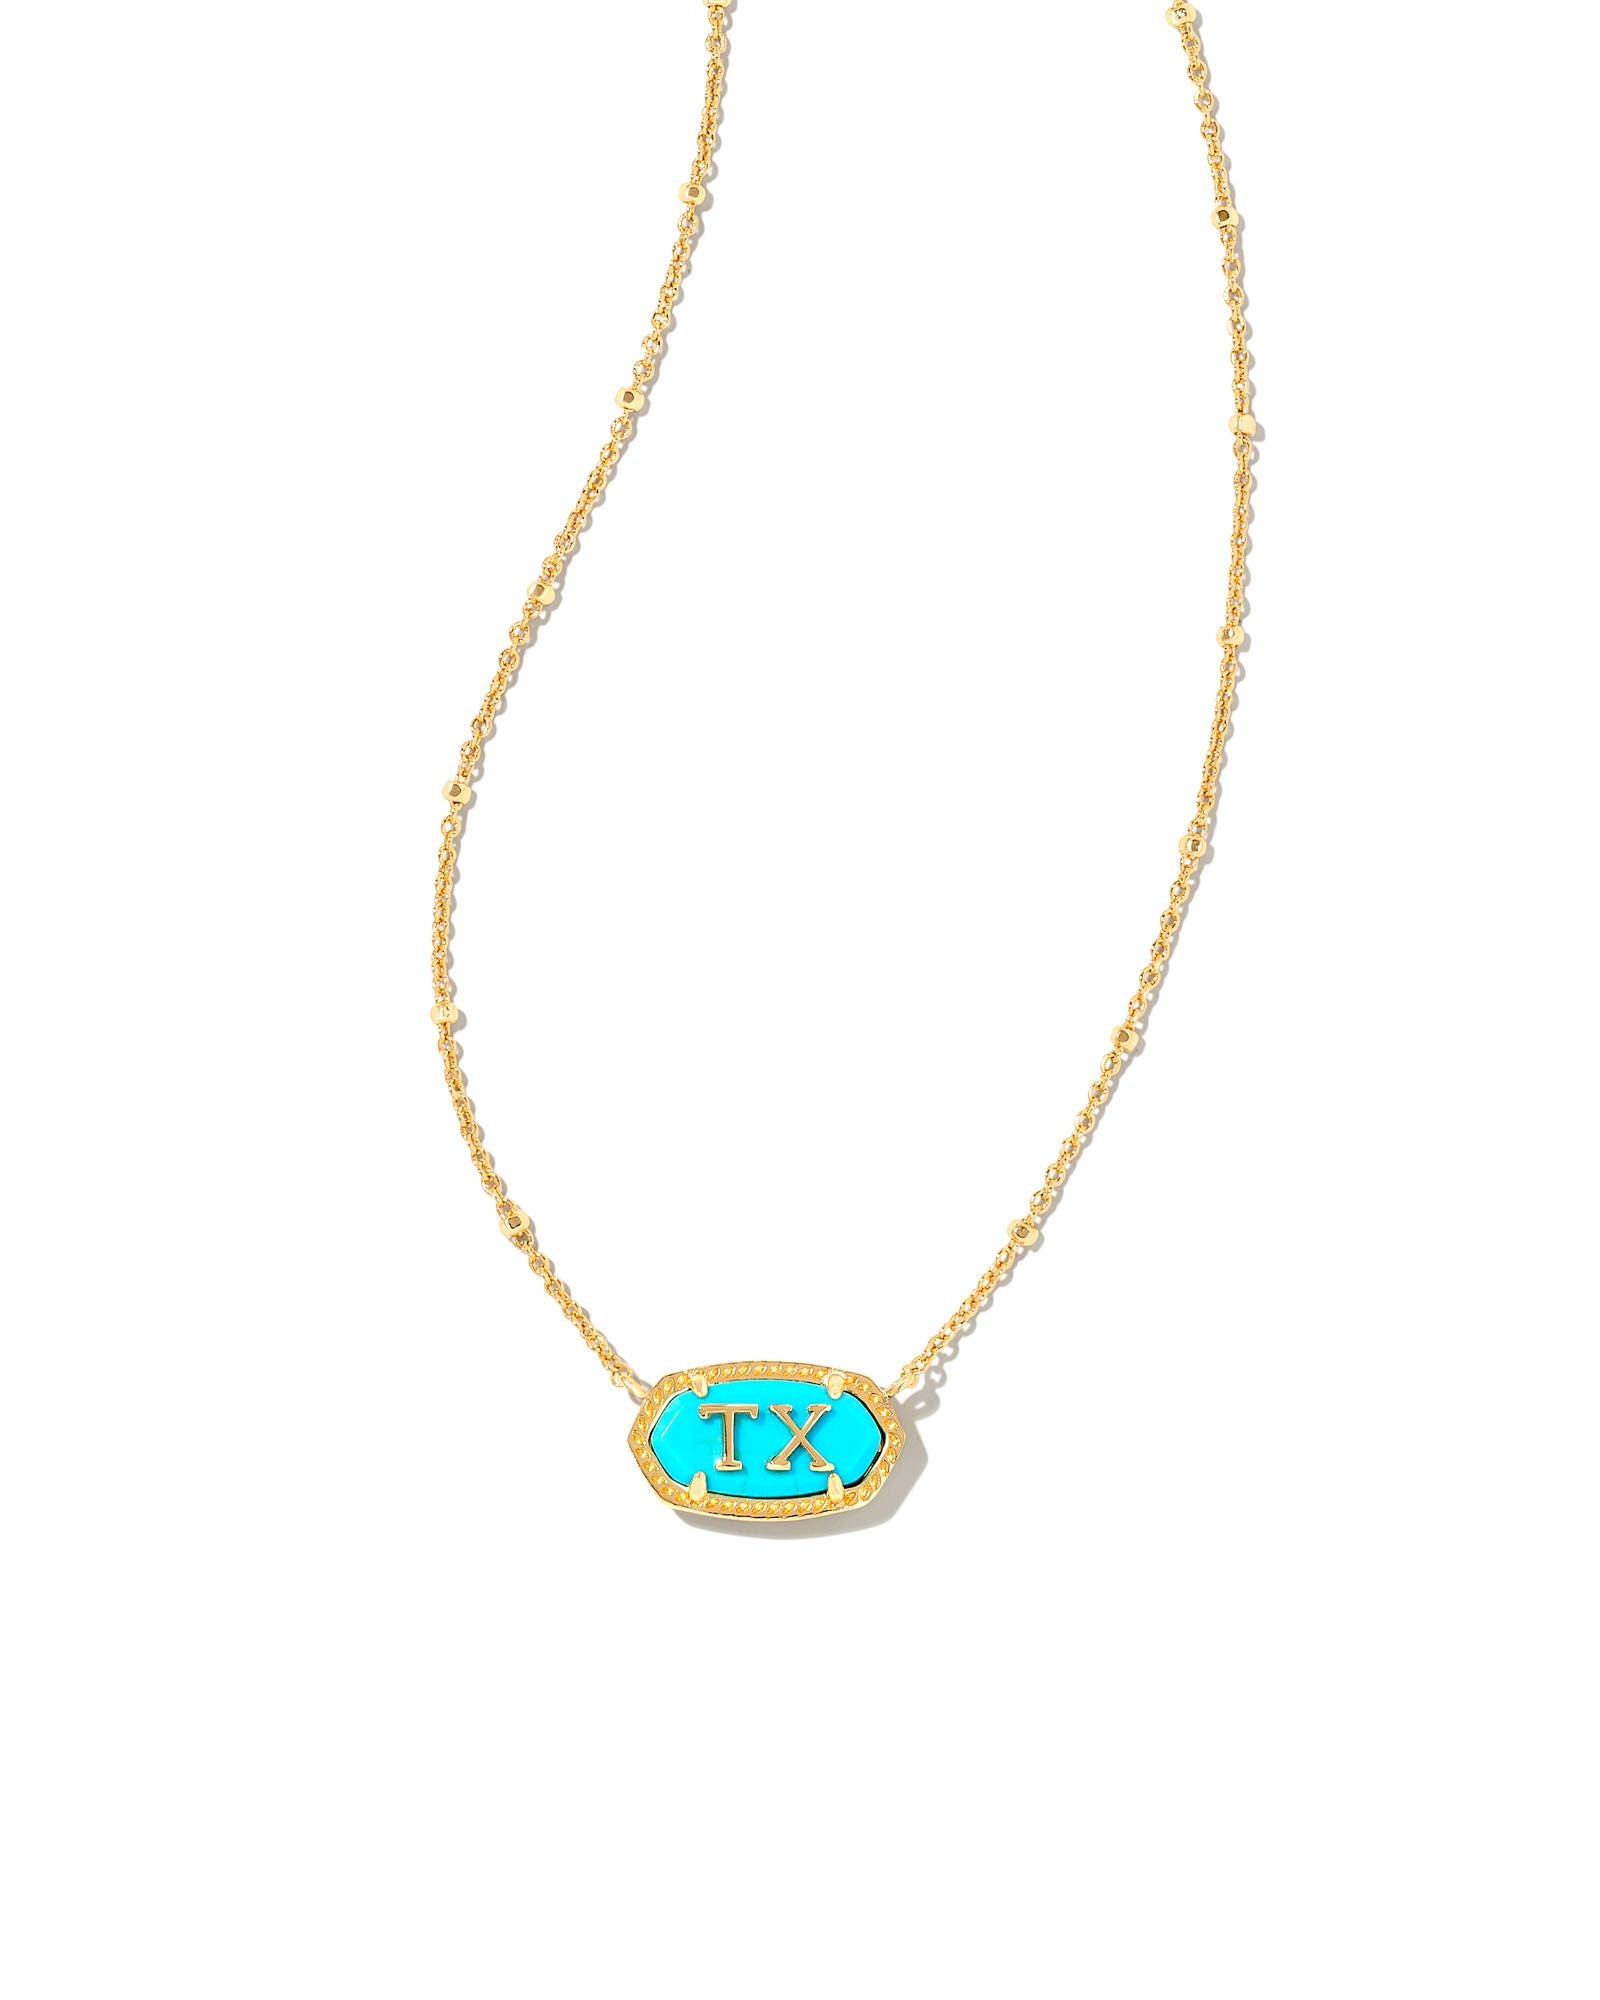 Elisa Texas Necklace in Gold Turquoise